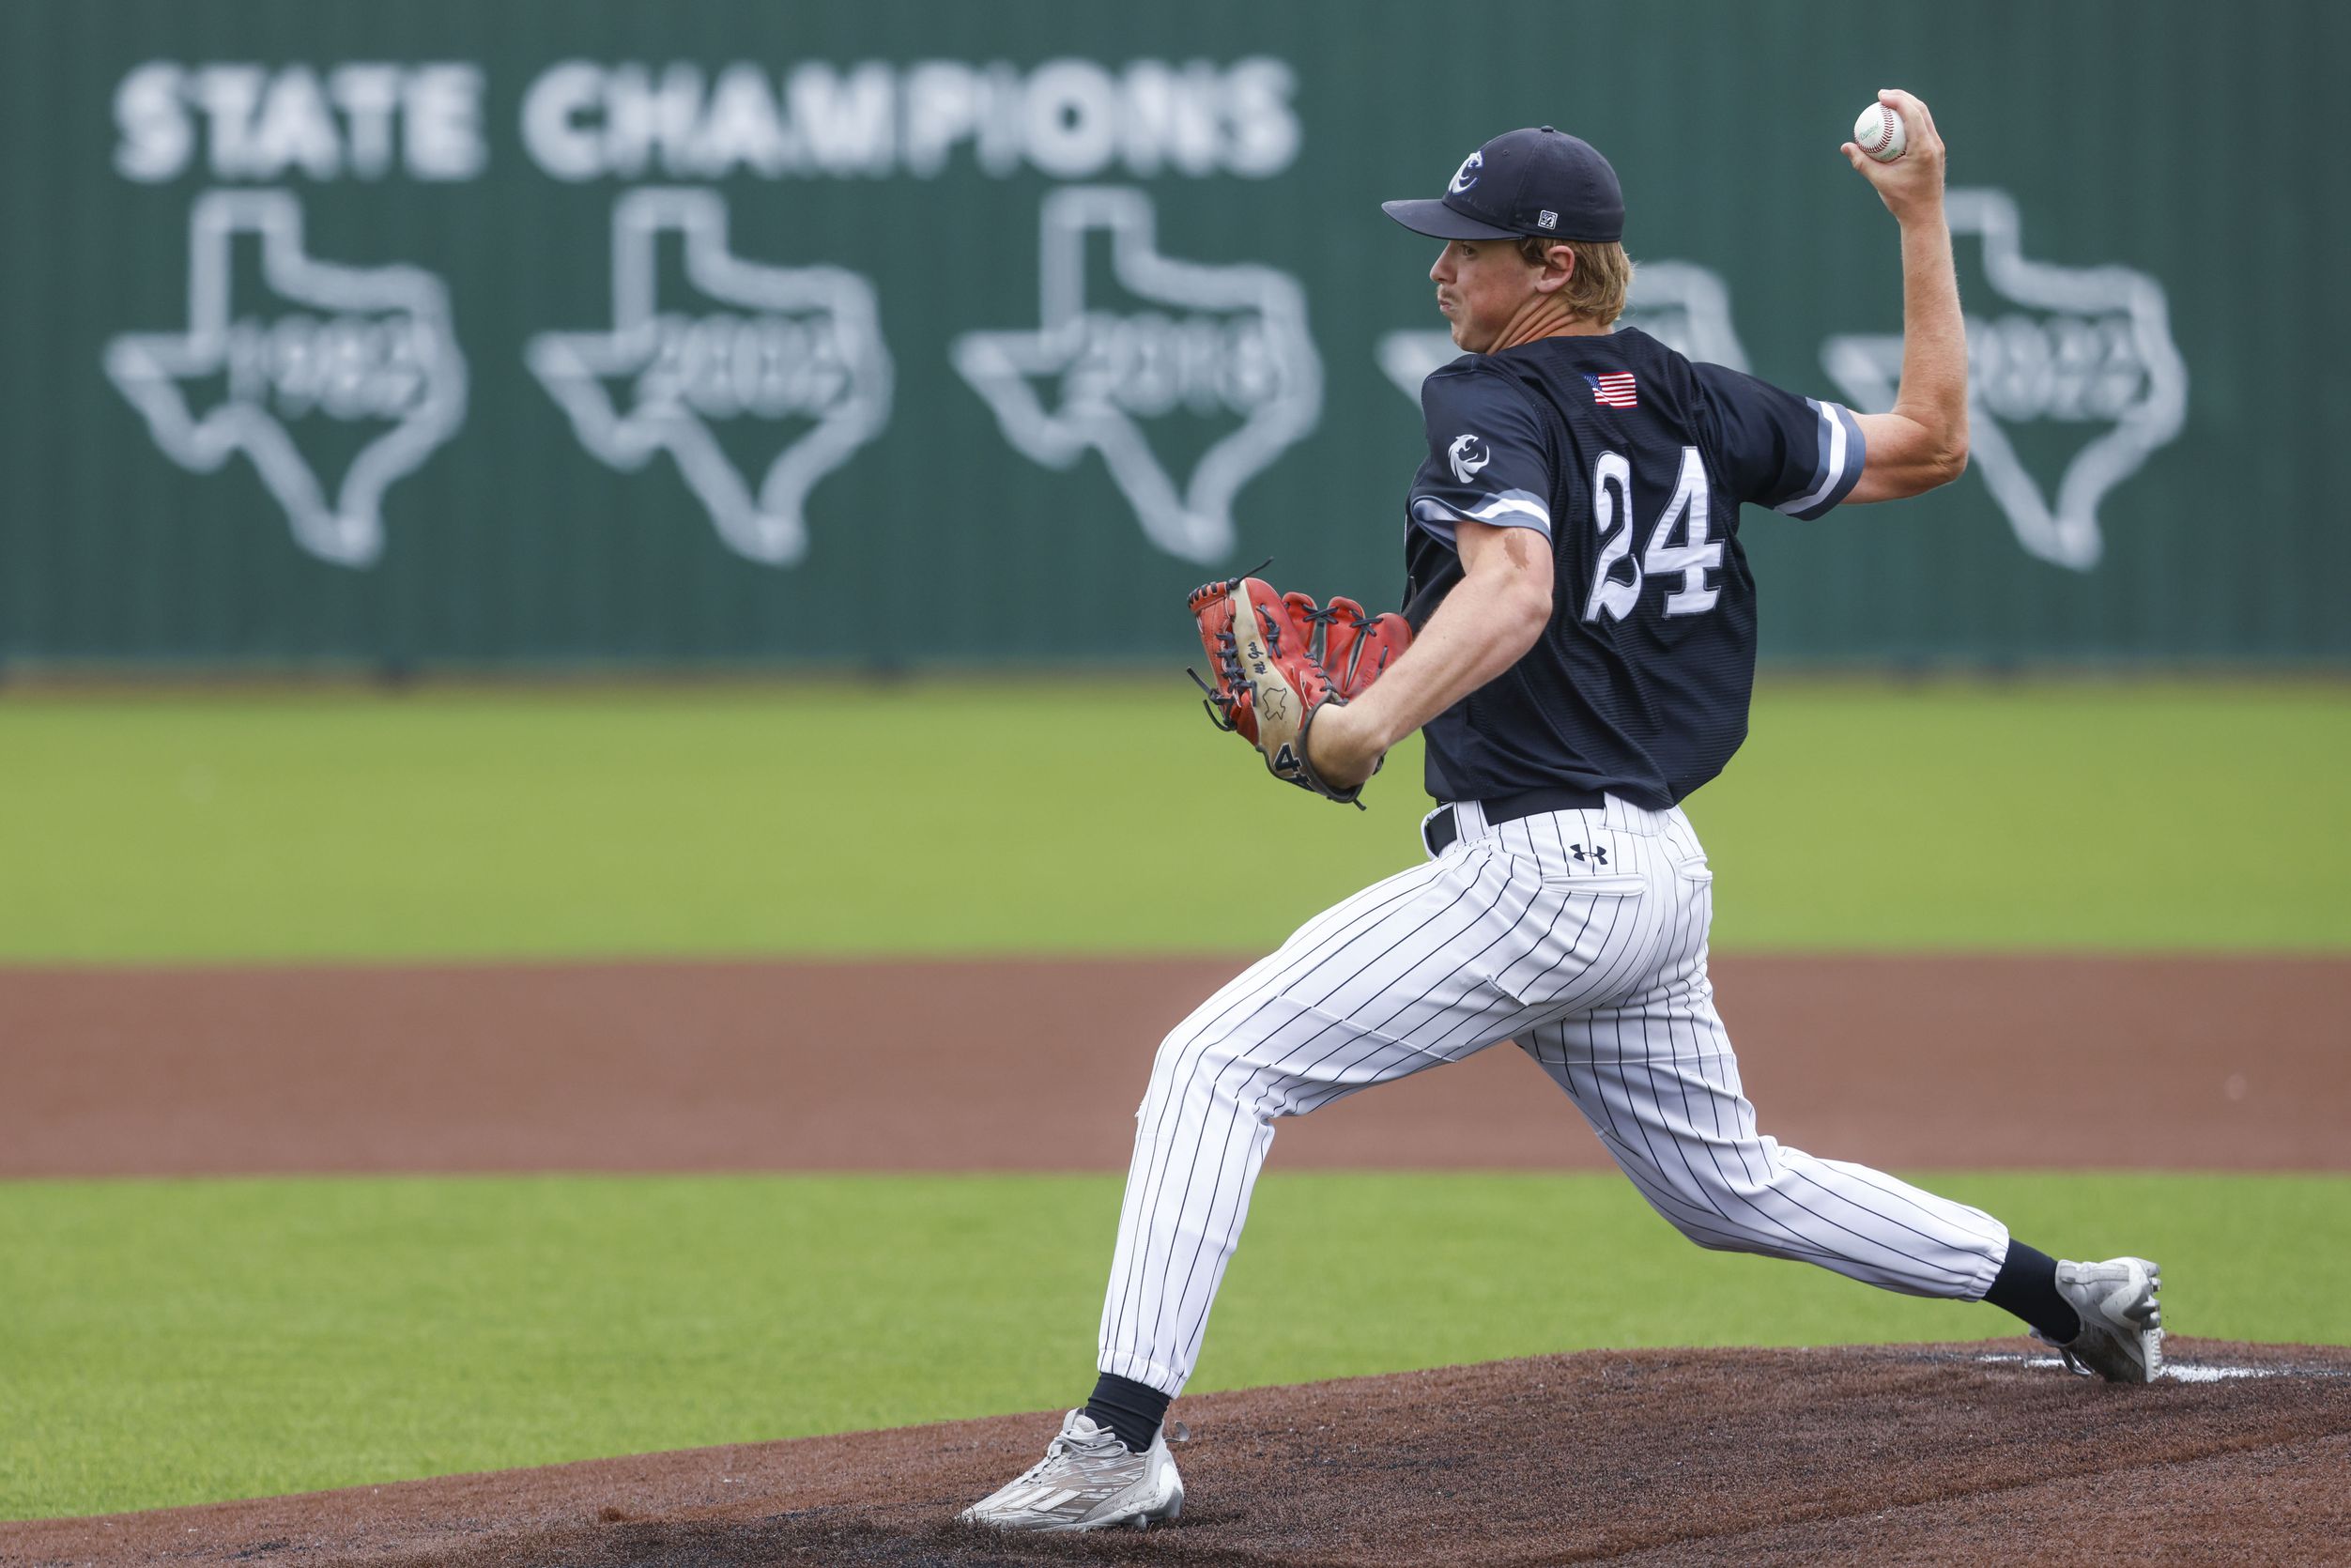 Denton Guyer’s Brad Pruett throws a pitch during the first inning of a baseball game against...